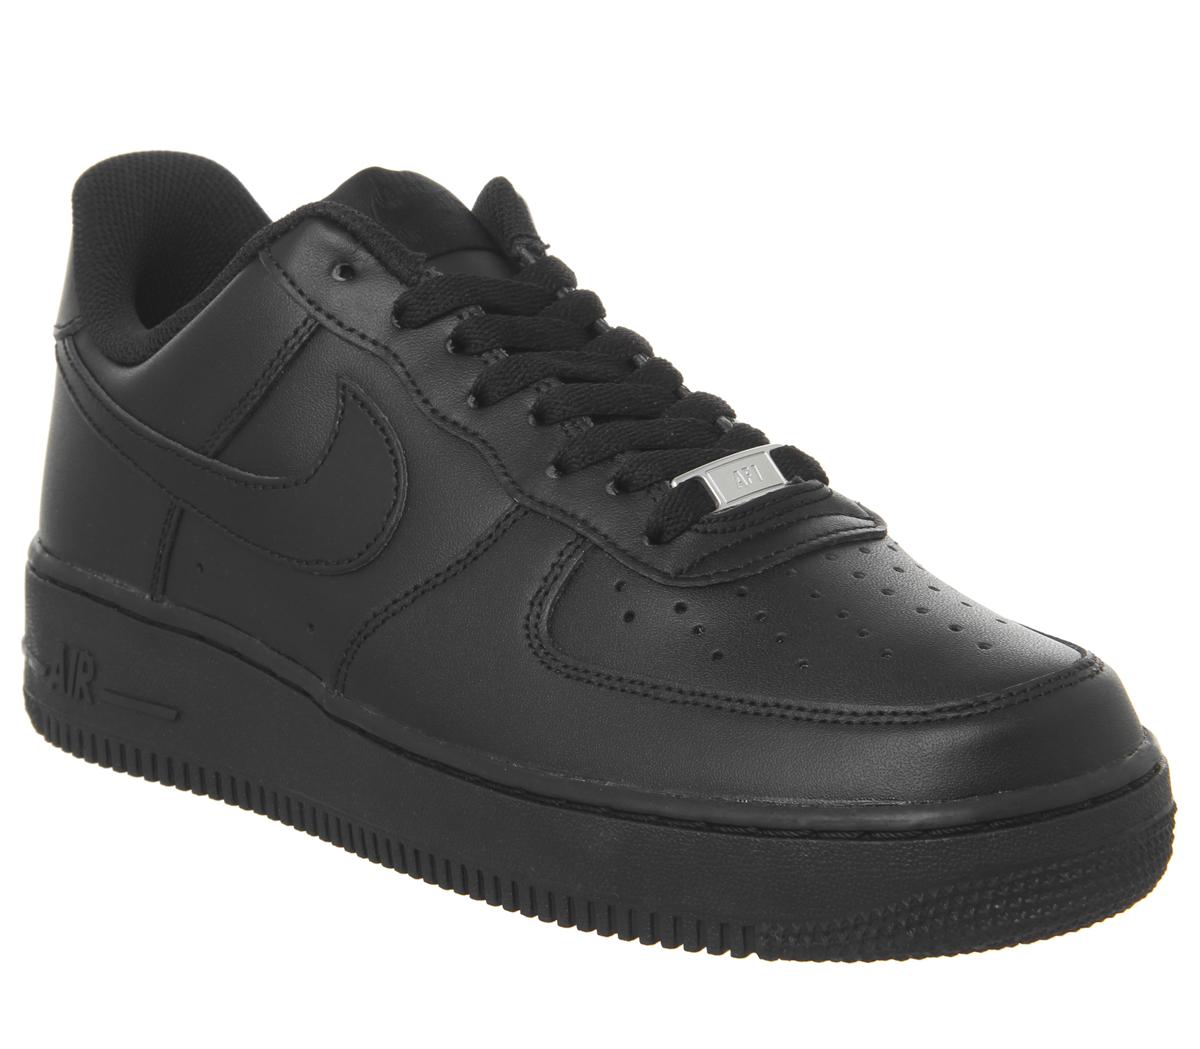 Nike Air Force 1 Trainers Black - His 